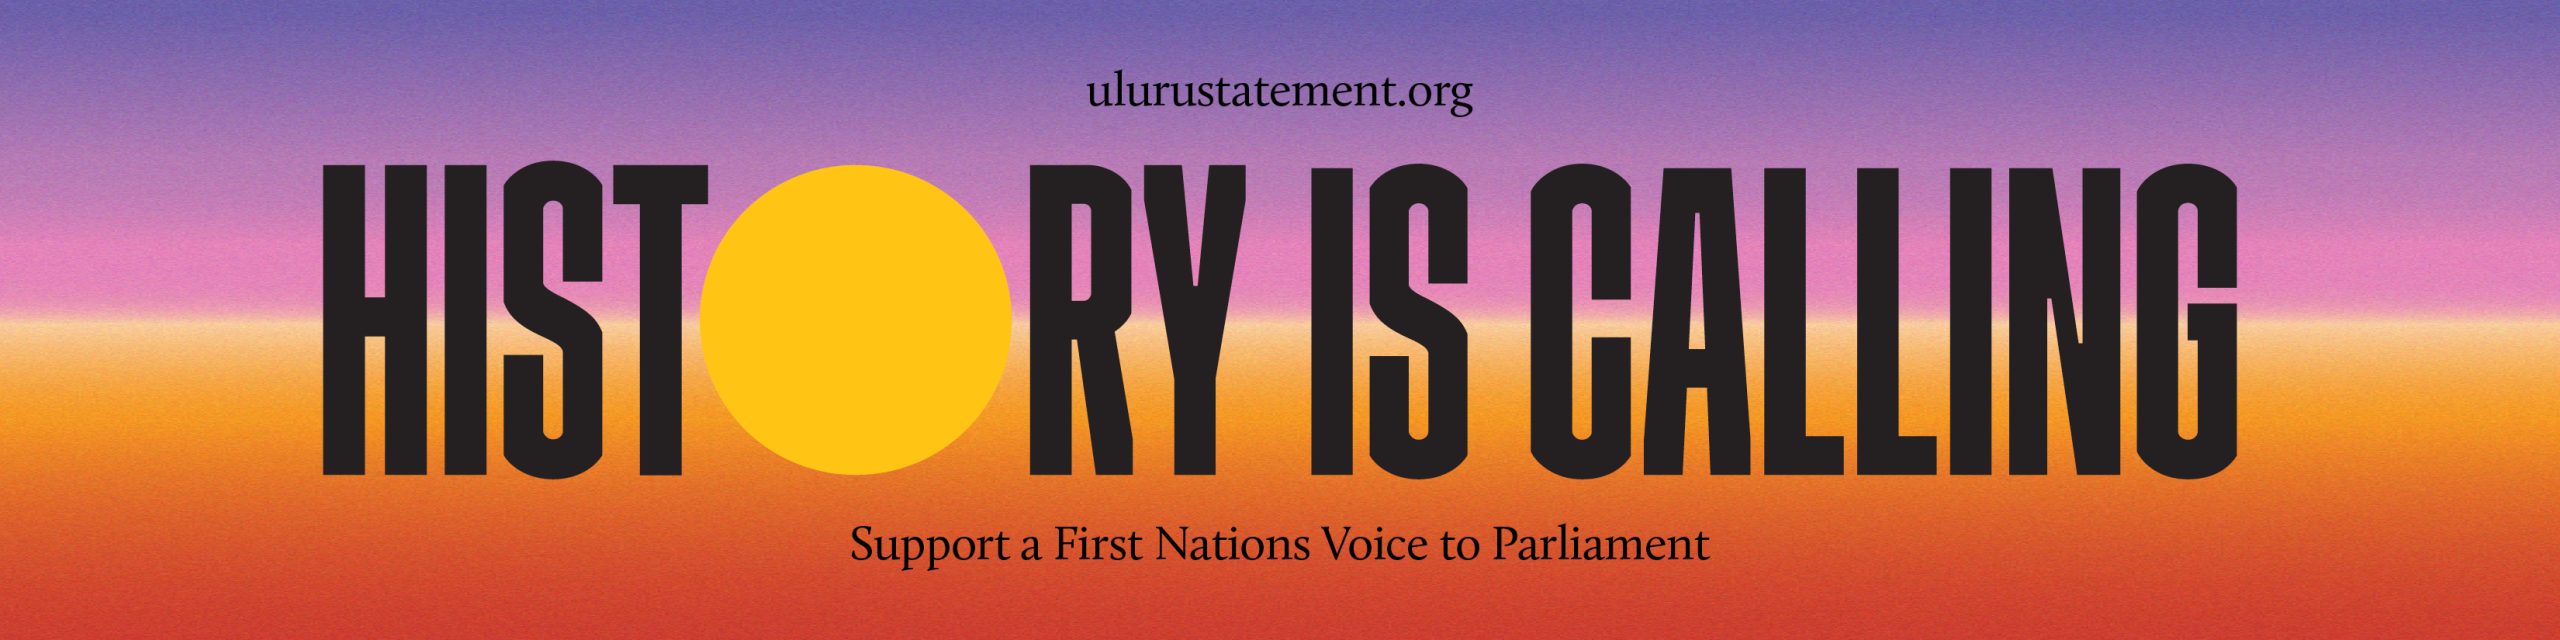 History is calling. Oxfam supports a First Nations Voice to Parliament